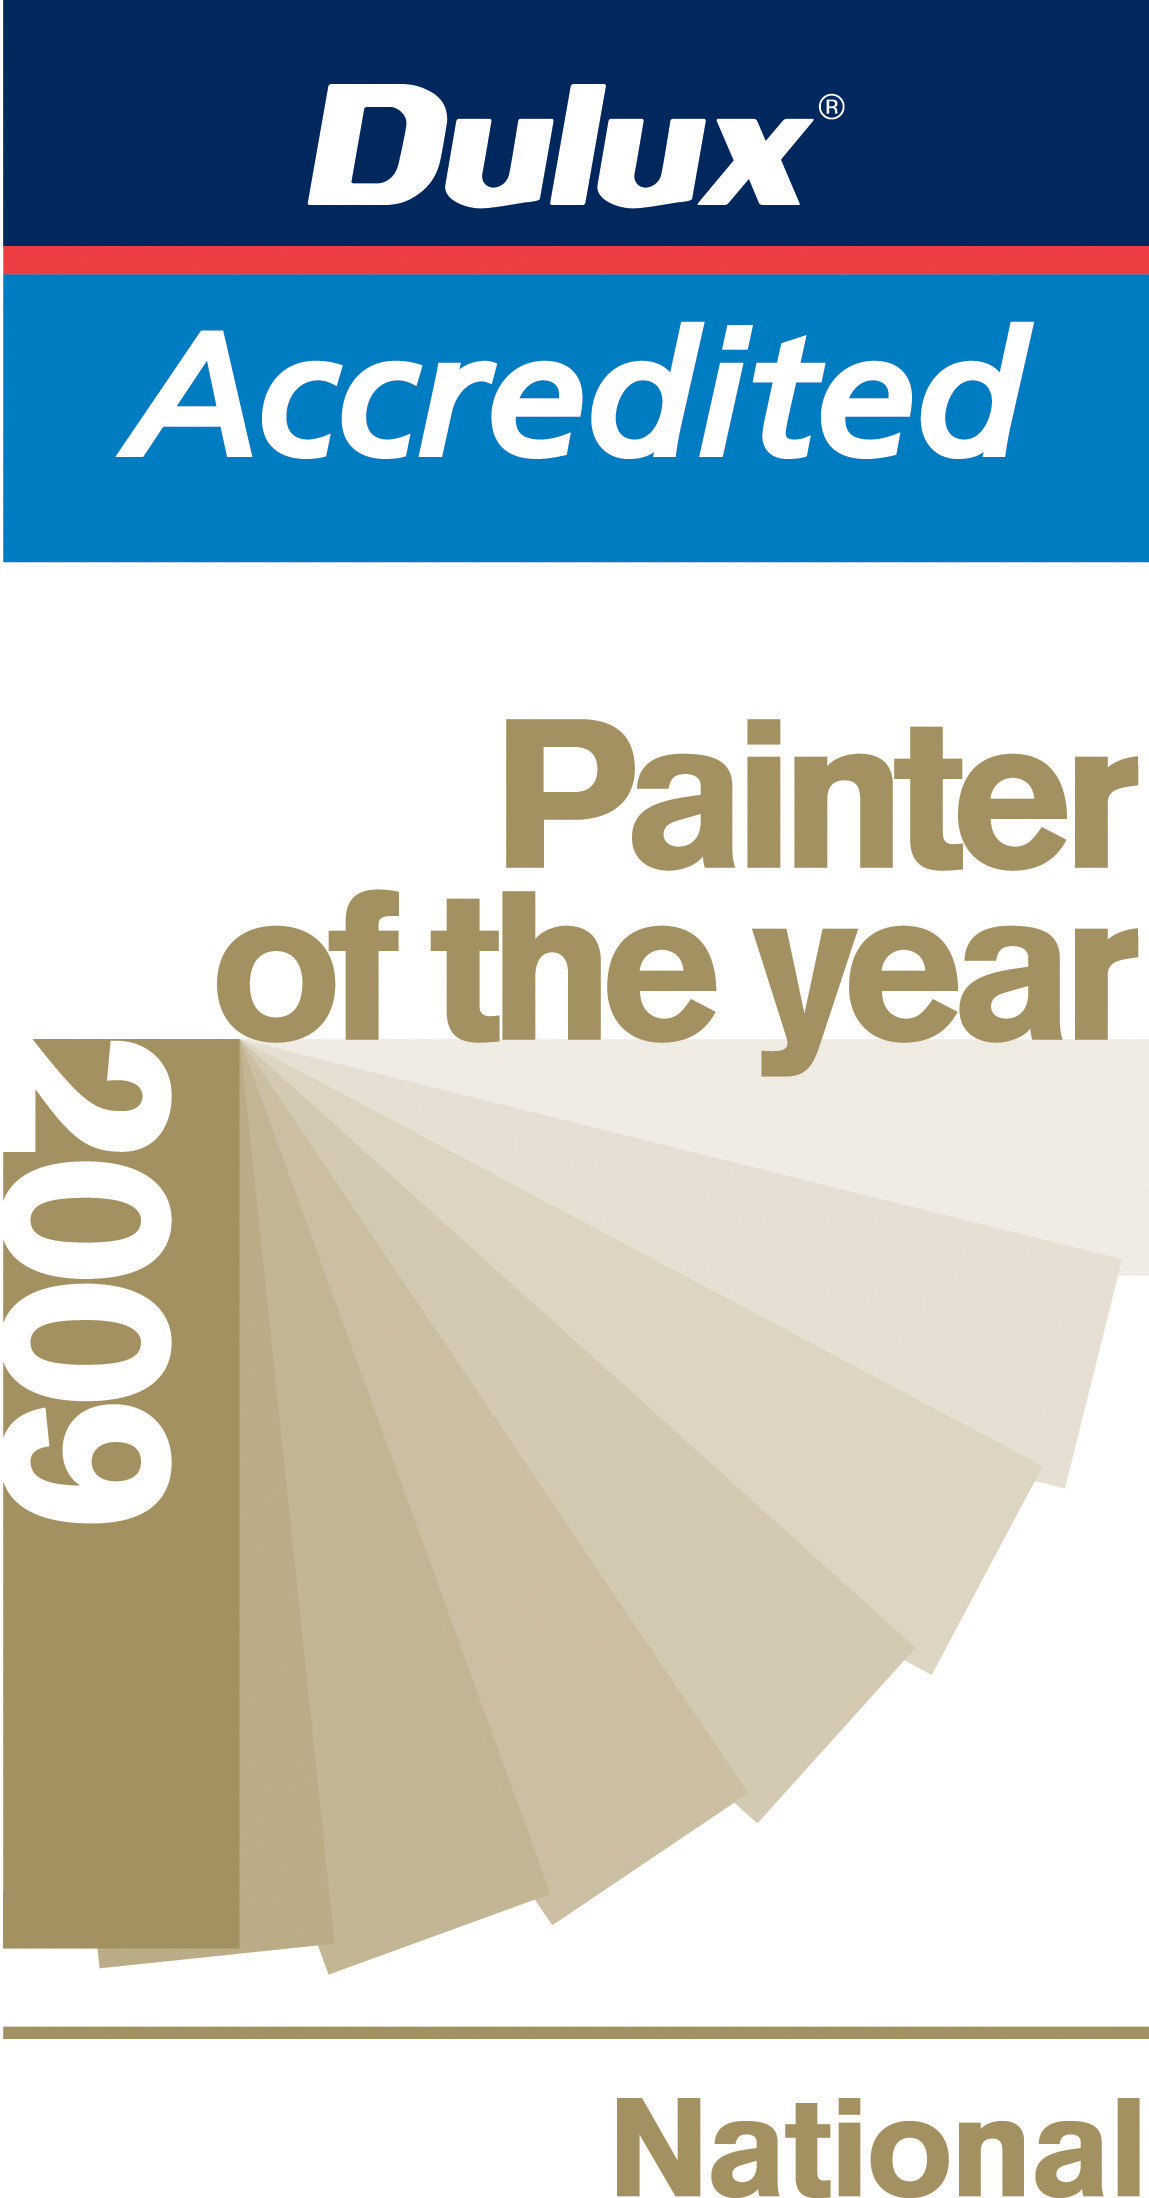 Dulux Accredited Painter of the Year 2009